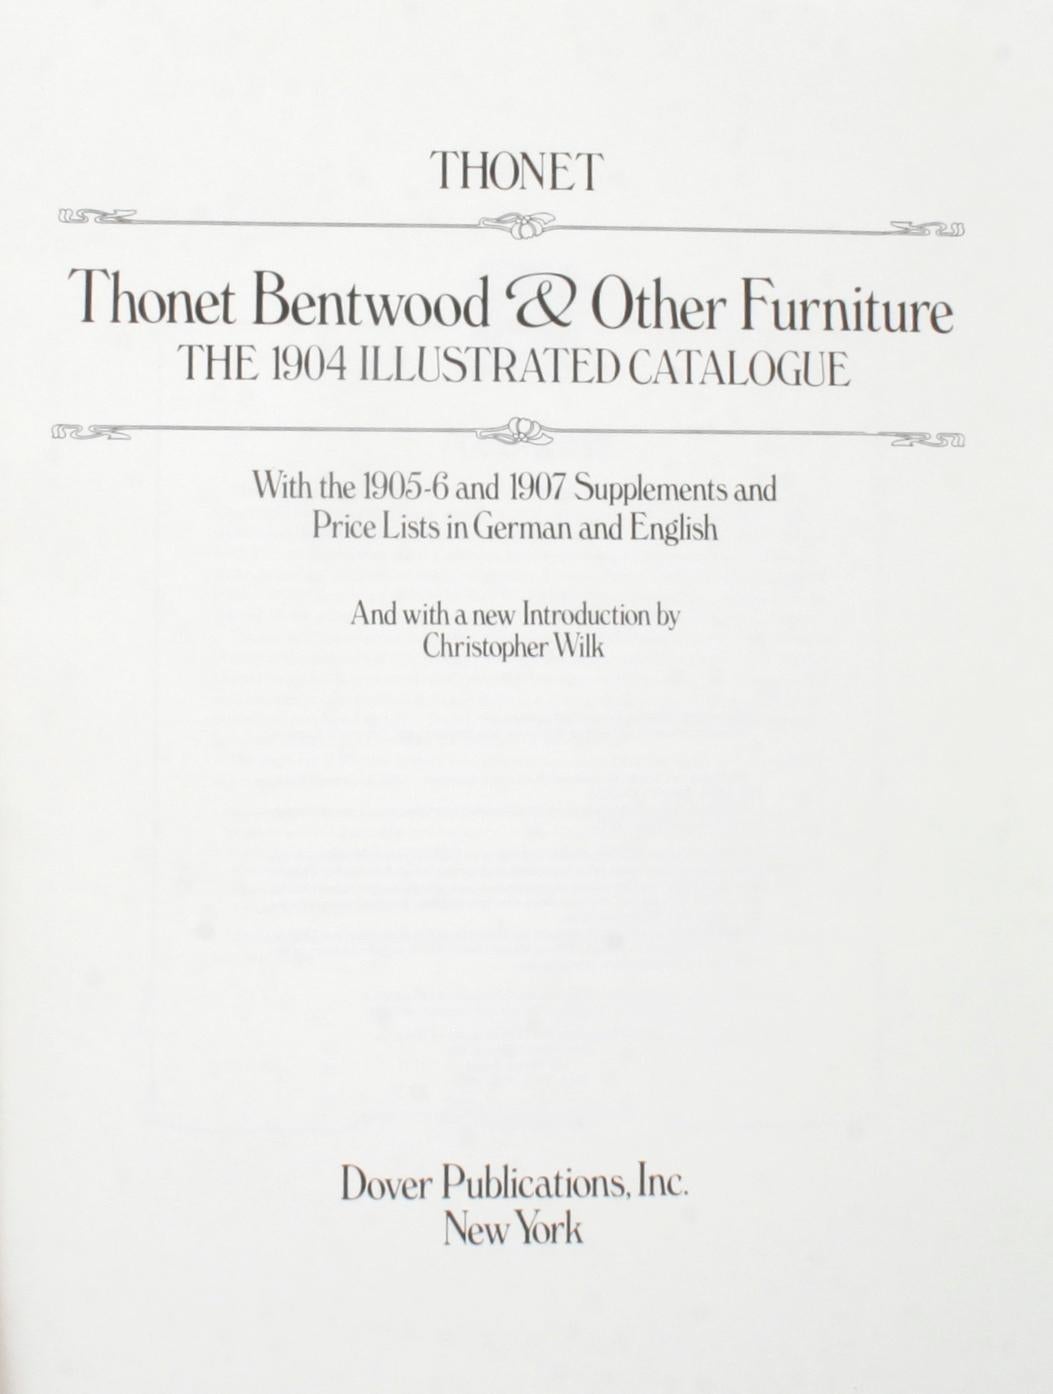 Thonet Bentwood & Other Furniture, the 1904 Illustrated Catalogue. New York: Dover Publication, Inc, 1980. Softcover. 154 pp. Reproduction of the illustrated catalogue and price lists published by Gebrüder Thonet, Vienna, 1904, with supplements